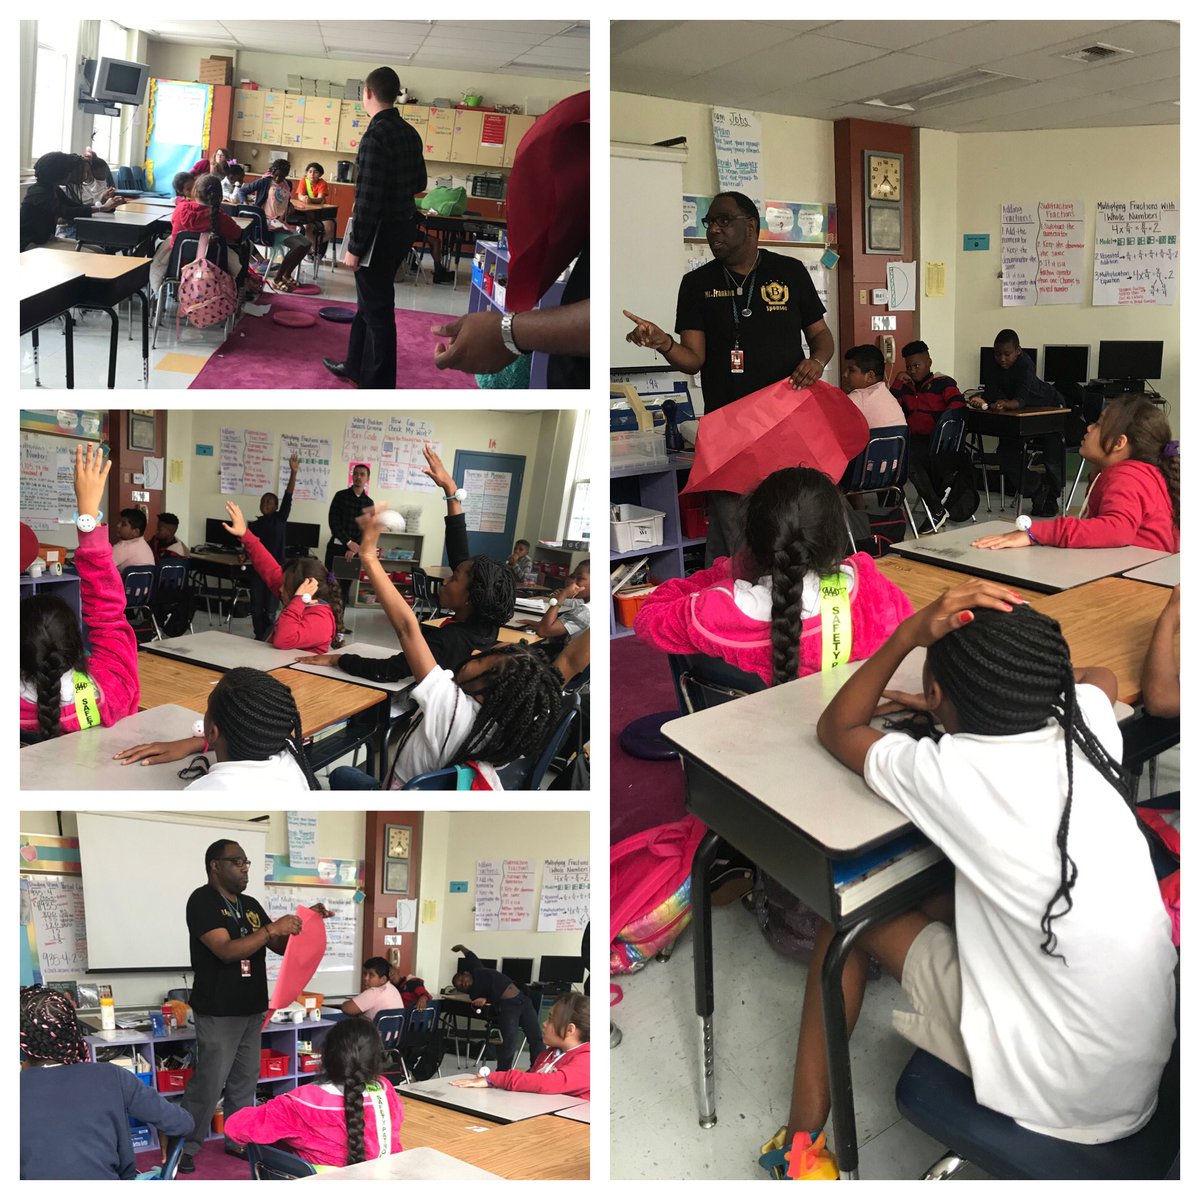 Thank you SO much @MrFranklin400 and Mr. Willis for teaching a wonderful guidance lesson to our scholars!! It was very meaningful and helpful to each and every one. And I do believe all of their jaws dropped when they figured out who RJ was 😱#wordscanhurt #wrinkledheart ❤️